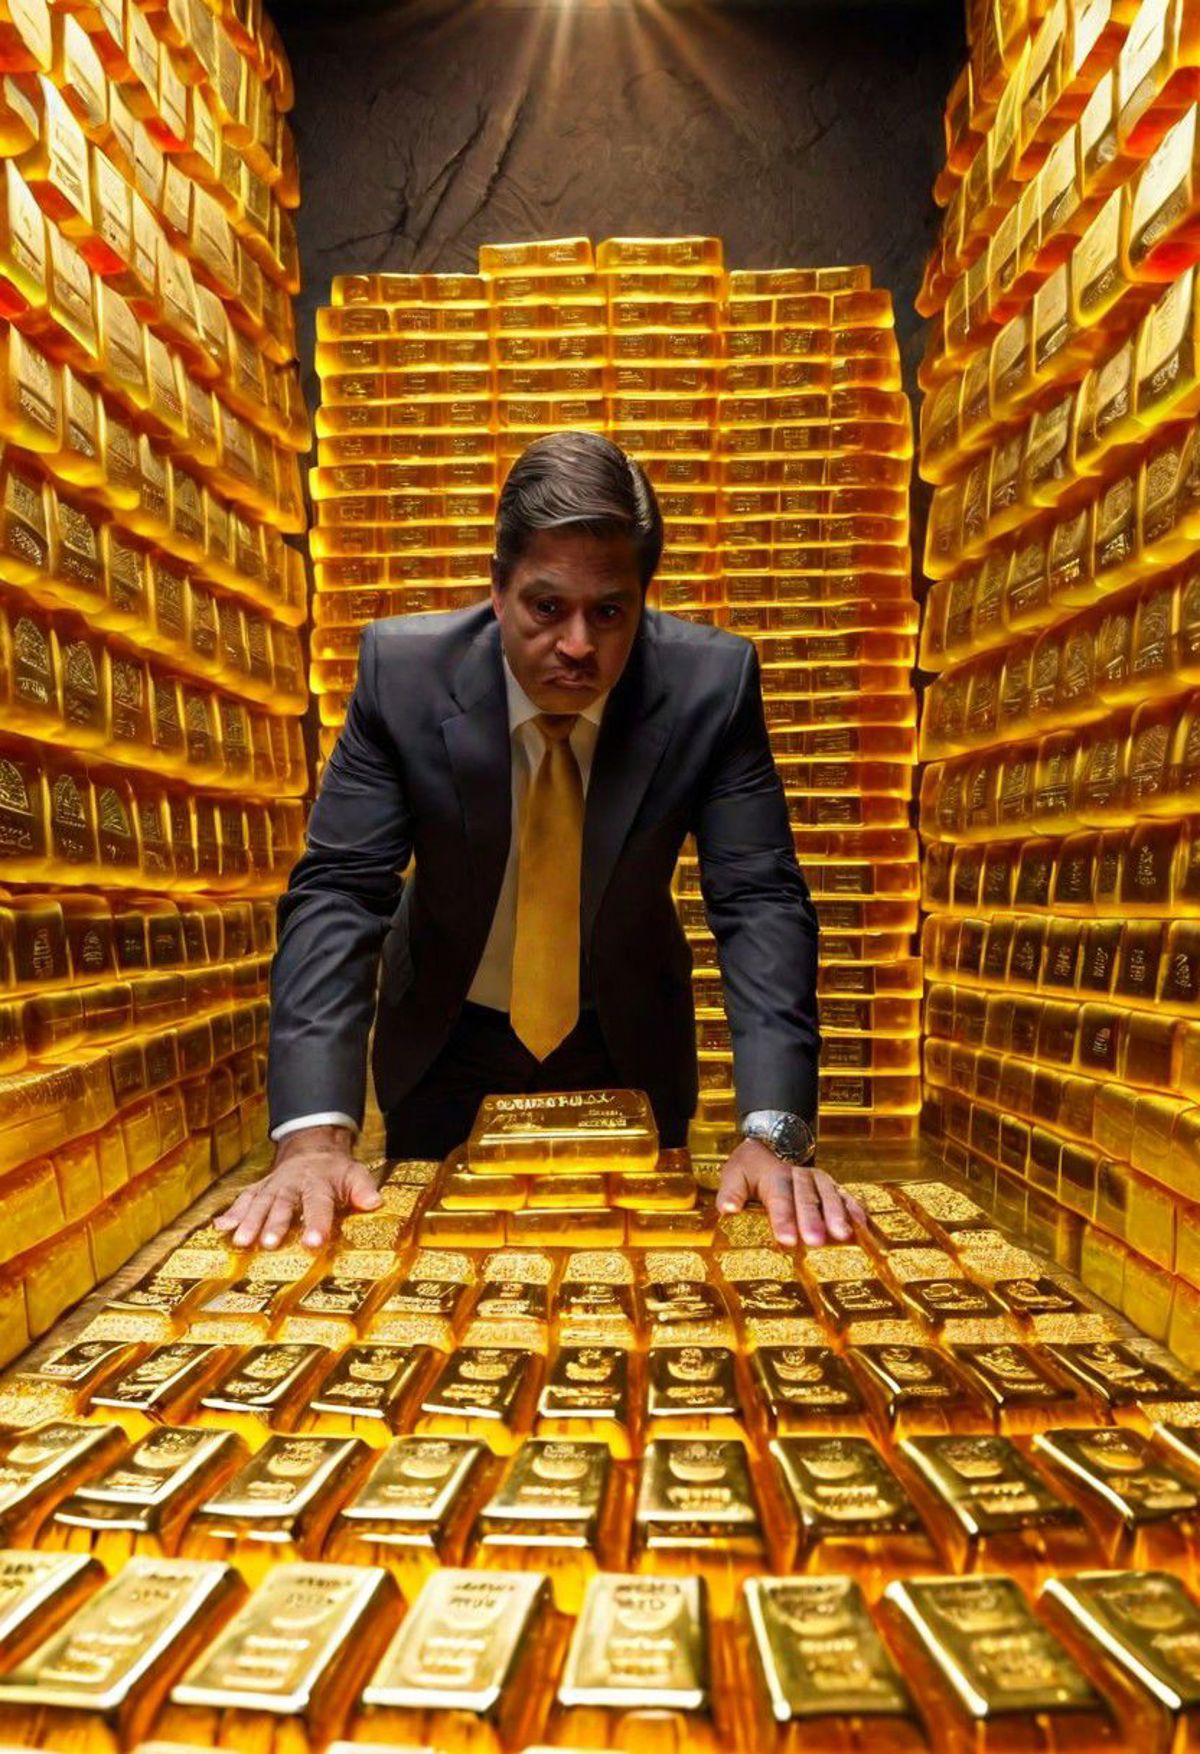 Man standing in a room surrounded by gold bars and coins.